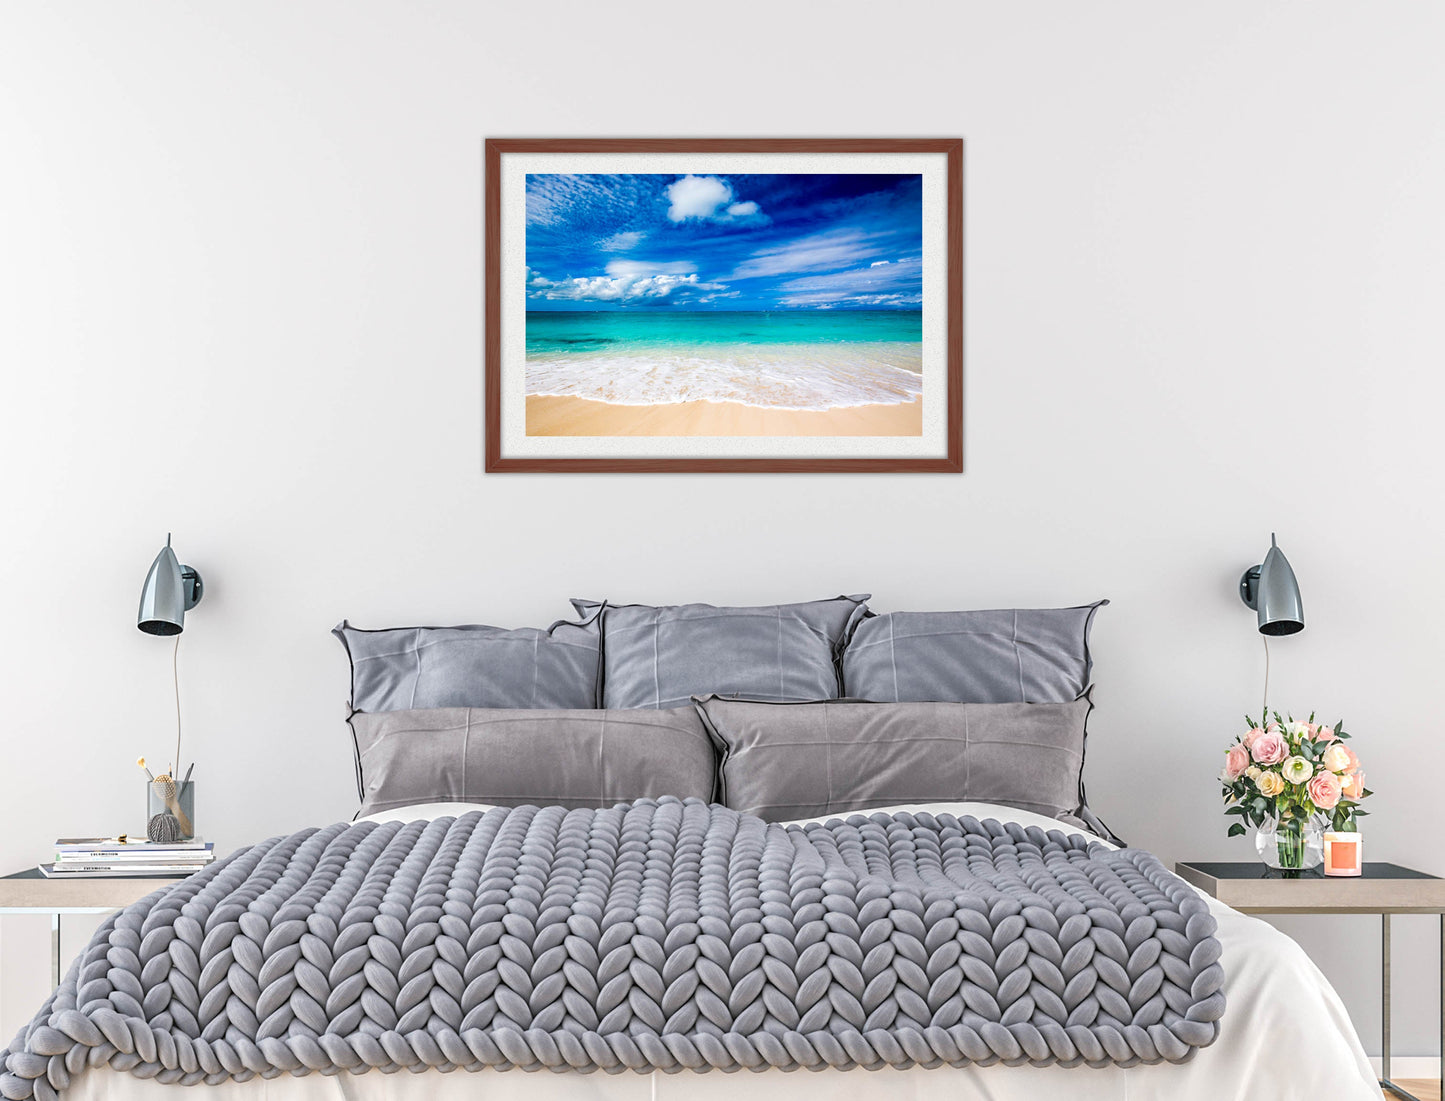 White Sand Beach - Evening on the Pond - Framed Photo - Mahogany Frame on Bedroom Wall